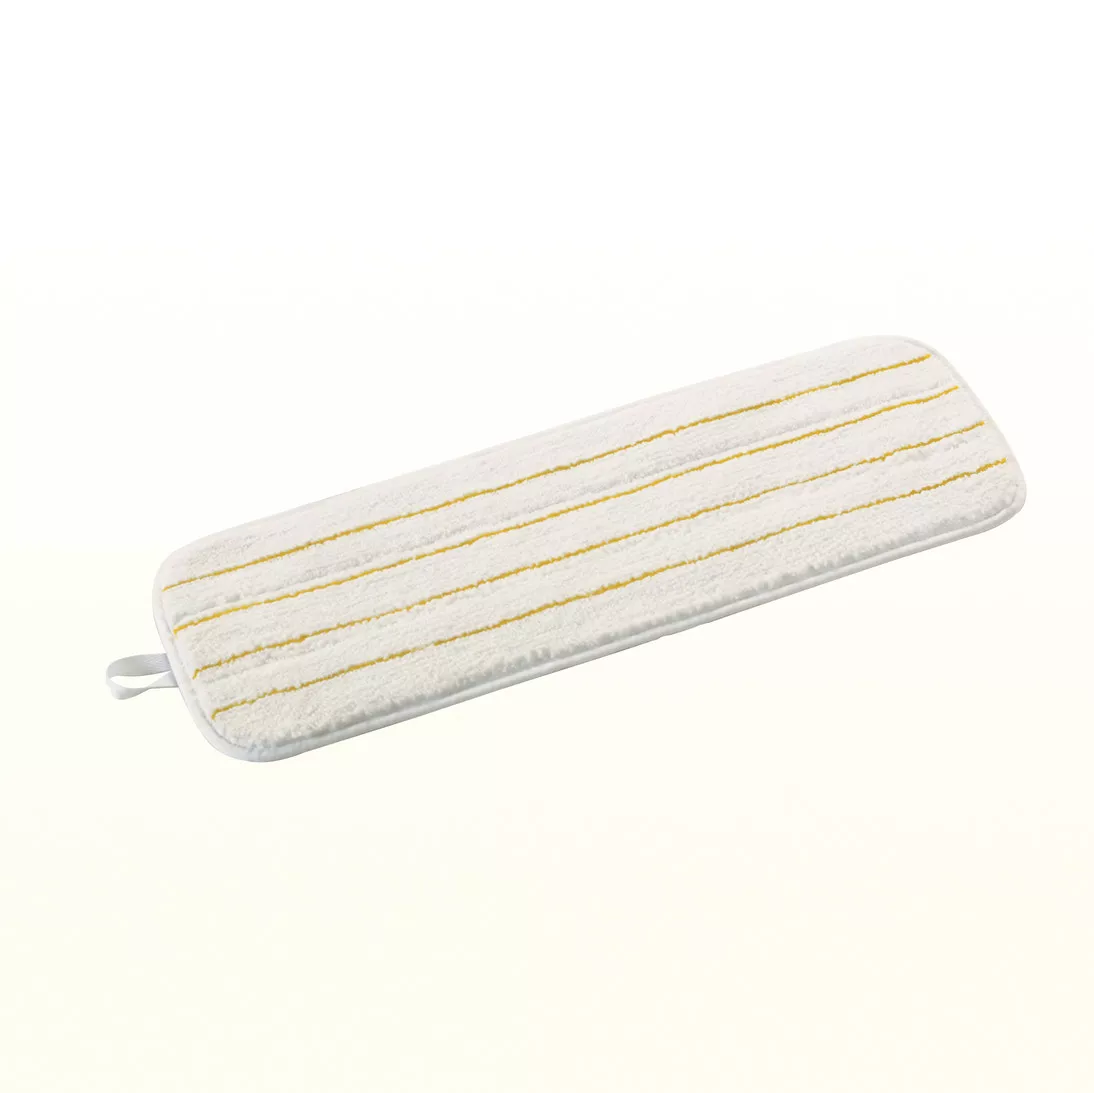 3M™ Easy Shine Applicator Pad, White with Yellow Stripes, 24 in, 10/case